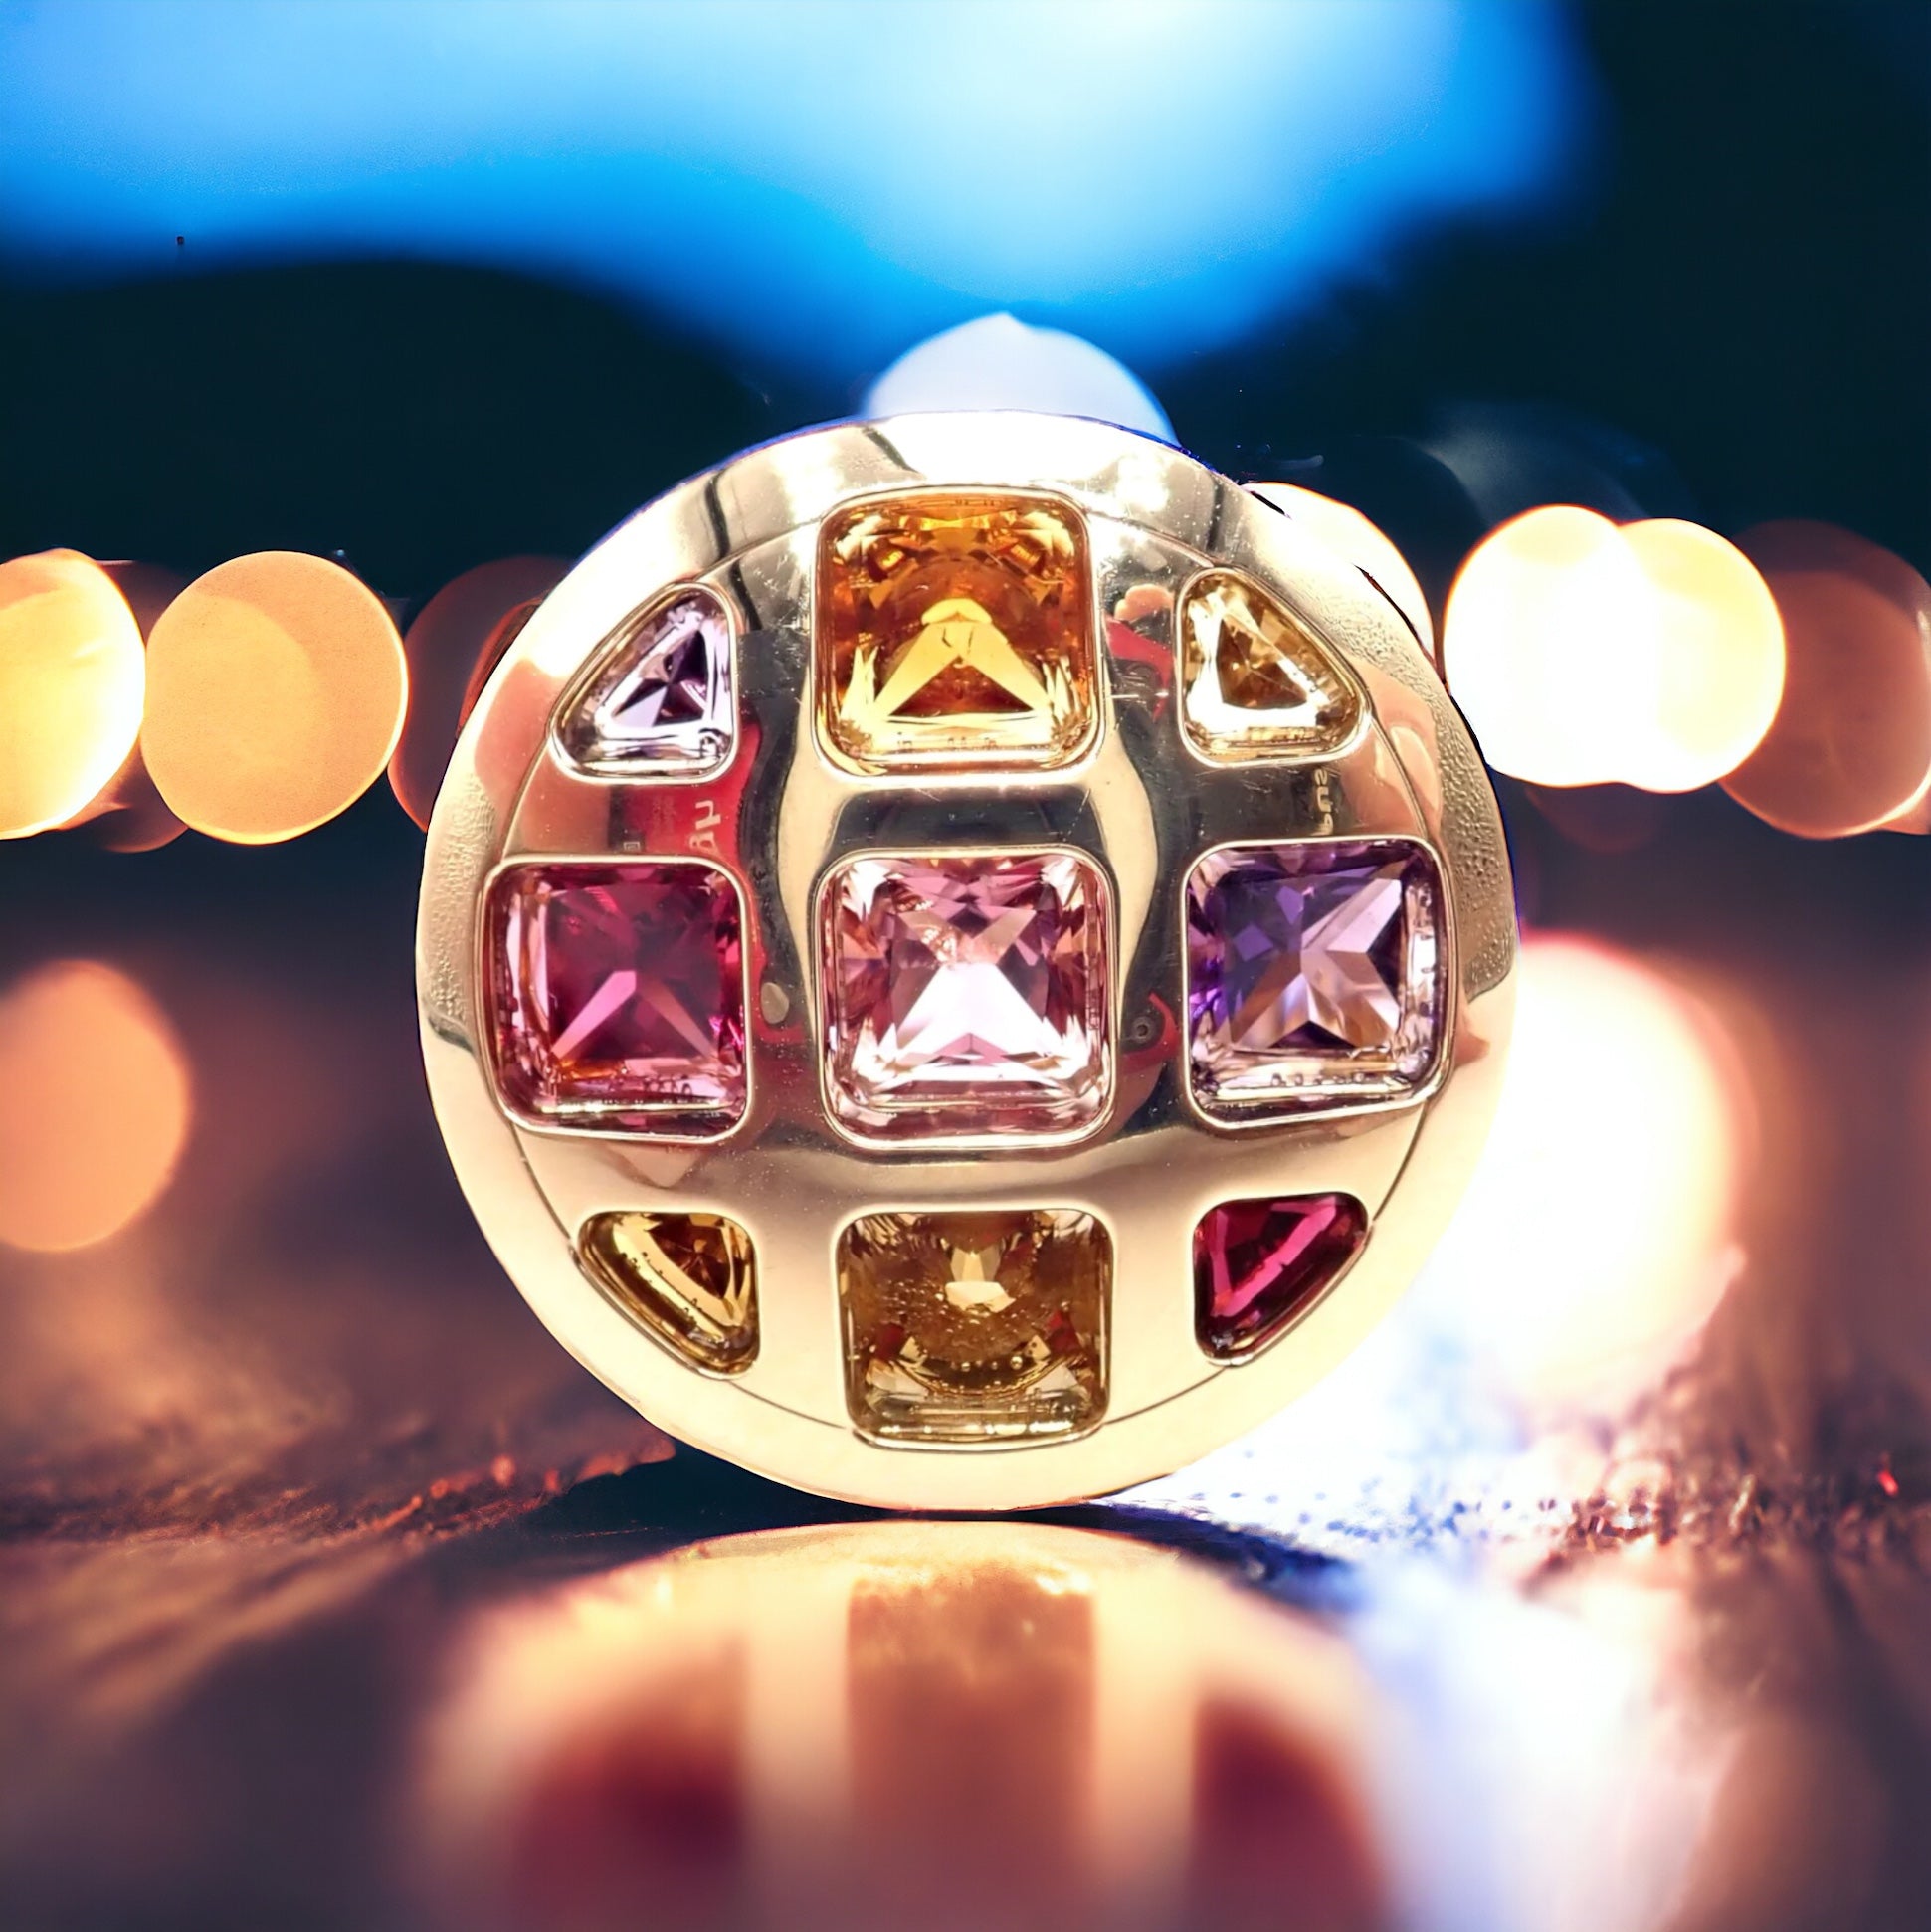 Cartier Jewelry & Watches:Fine Jewelry:Rings Authentic! Cartier Pasha 18k Yellow Gold Amethyst Citrine Garnet Tourmaline Ring